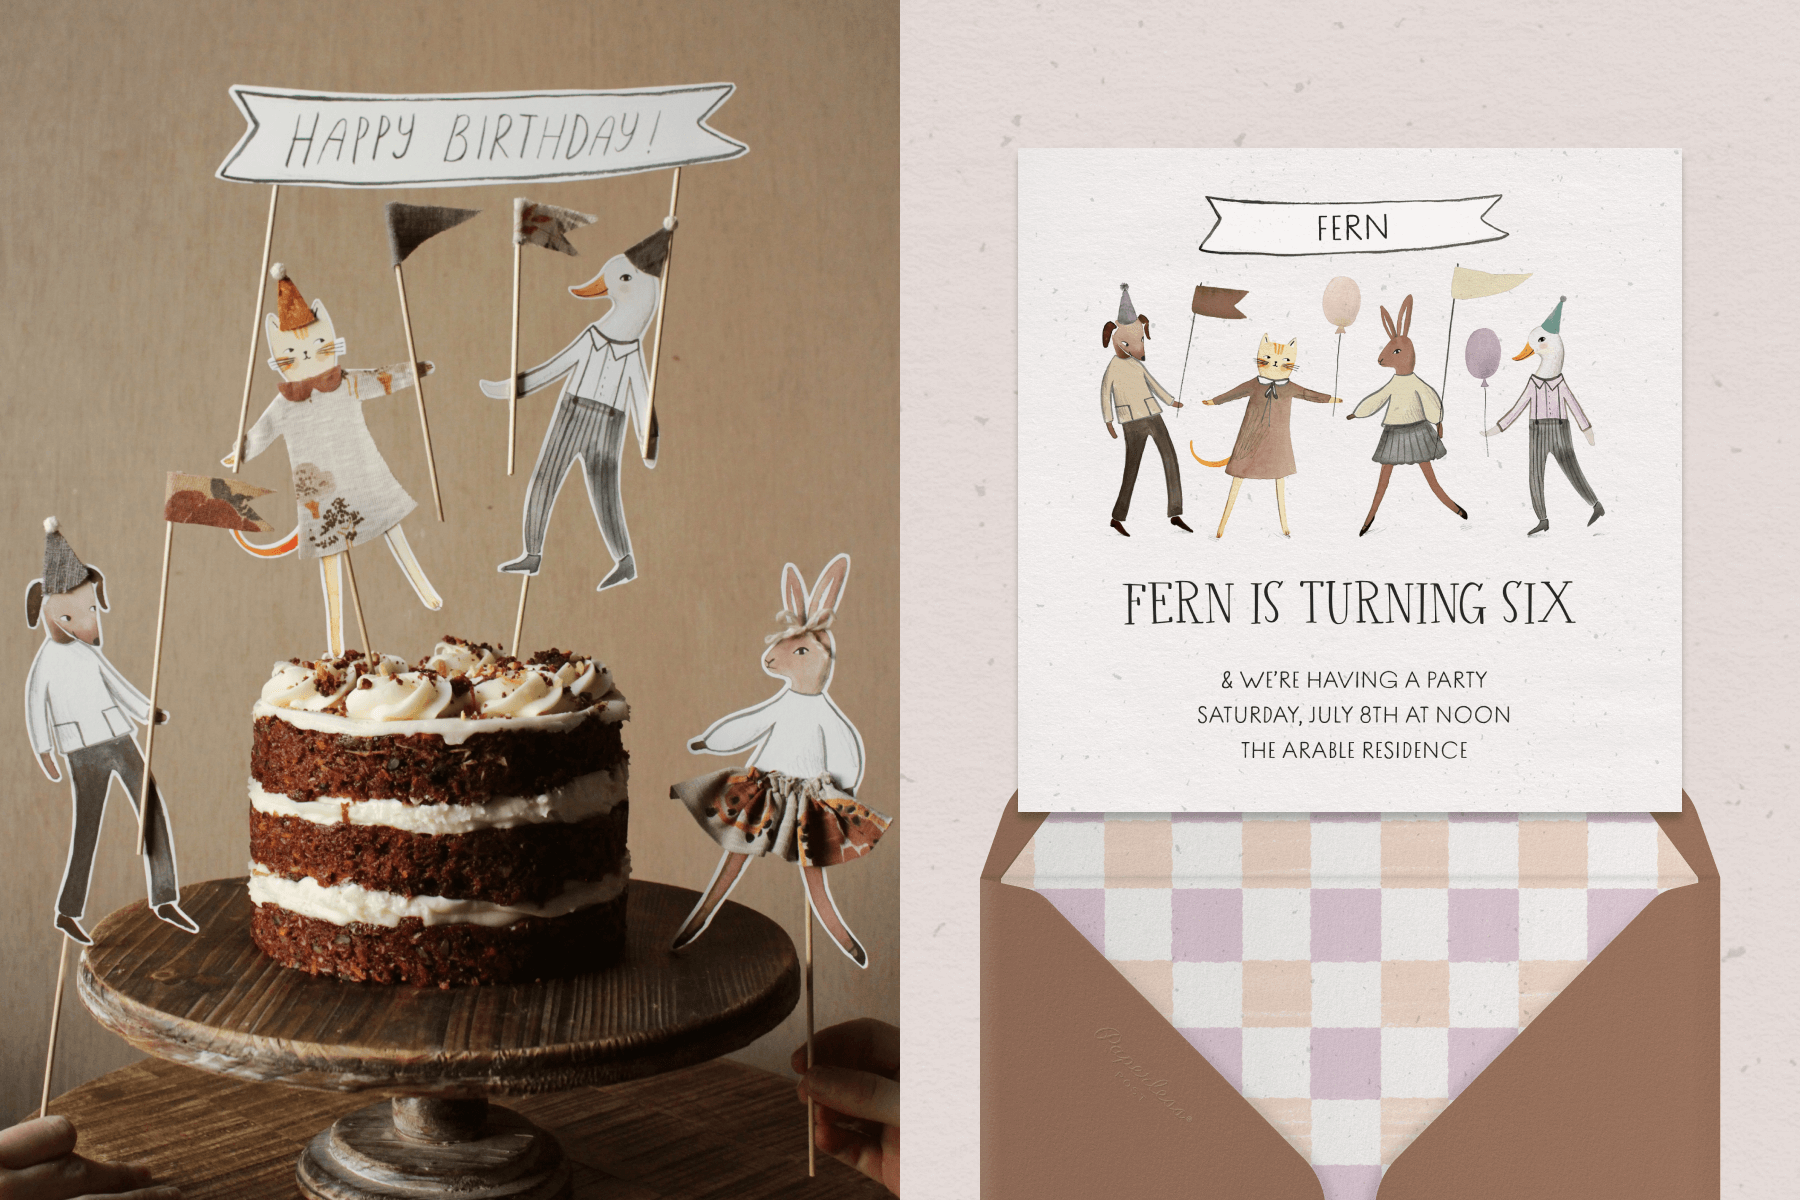 Left: Three-layered naked birthday cake topped with paper cutouts of partying animal characters. Right: Children's birthday invitation featuring illustrated partying animals holding a celebratory banner on an off-white background with a brown envelope. 